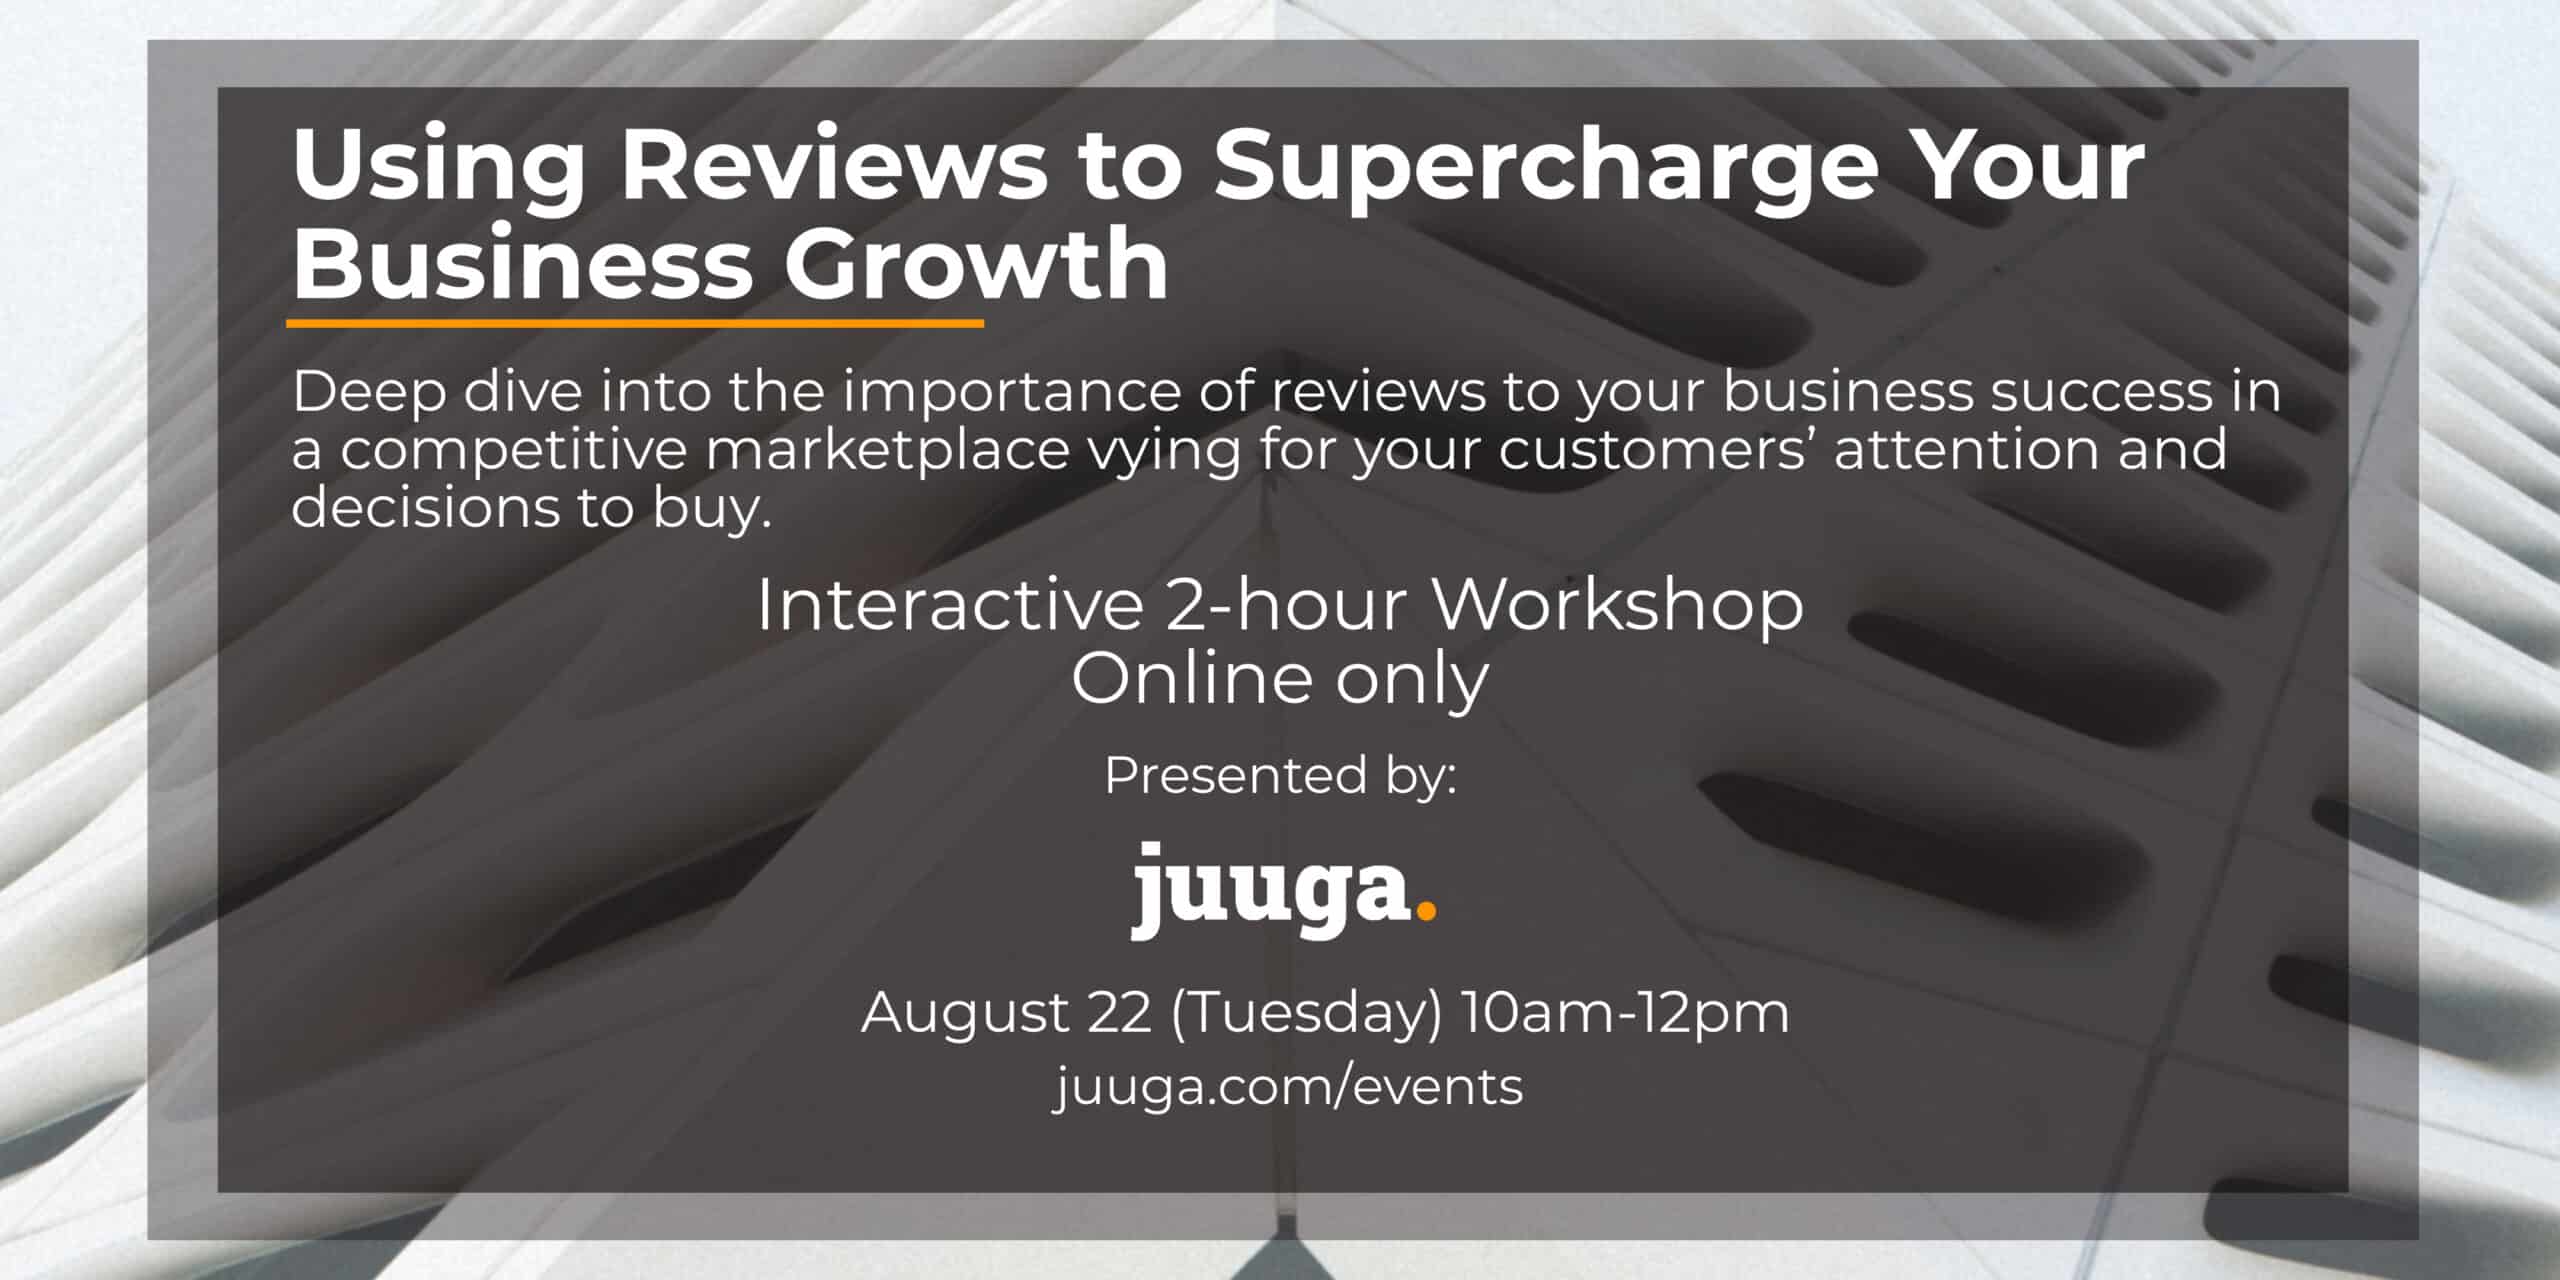 How to Get Reviews and Use them to Supercharge Your Business Growth